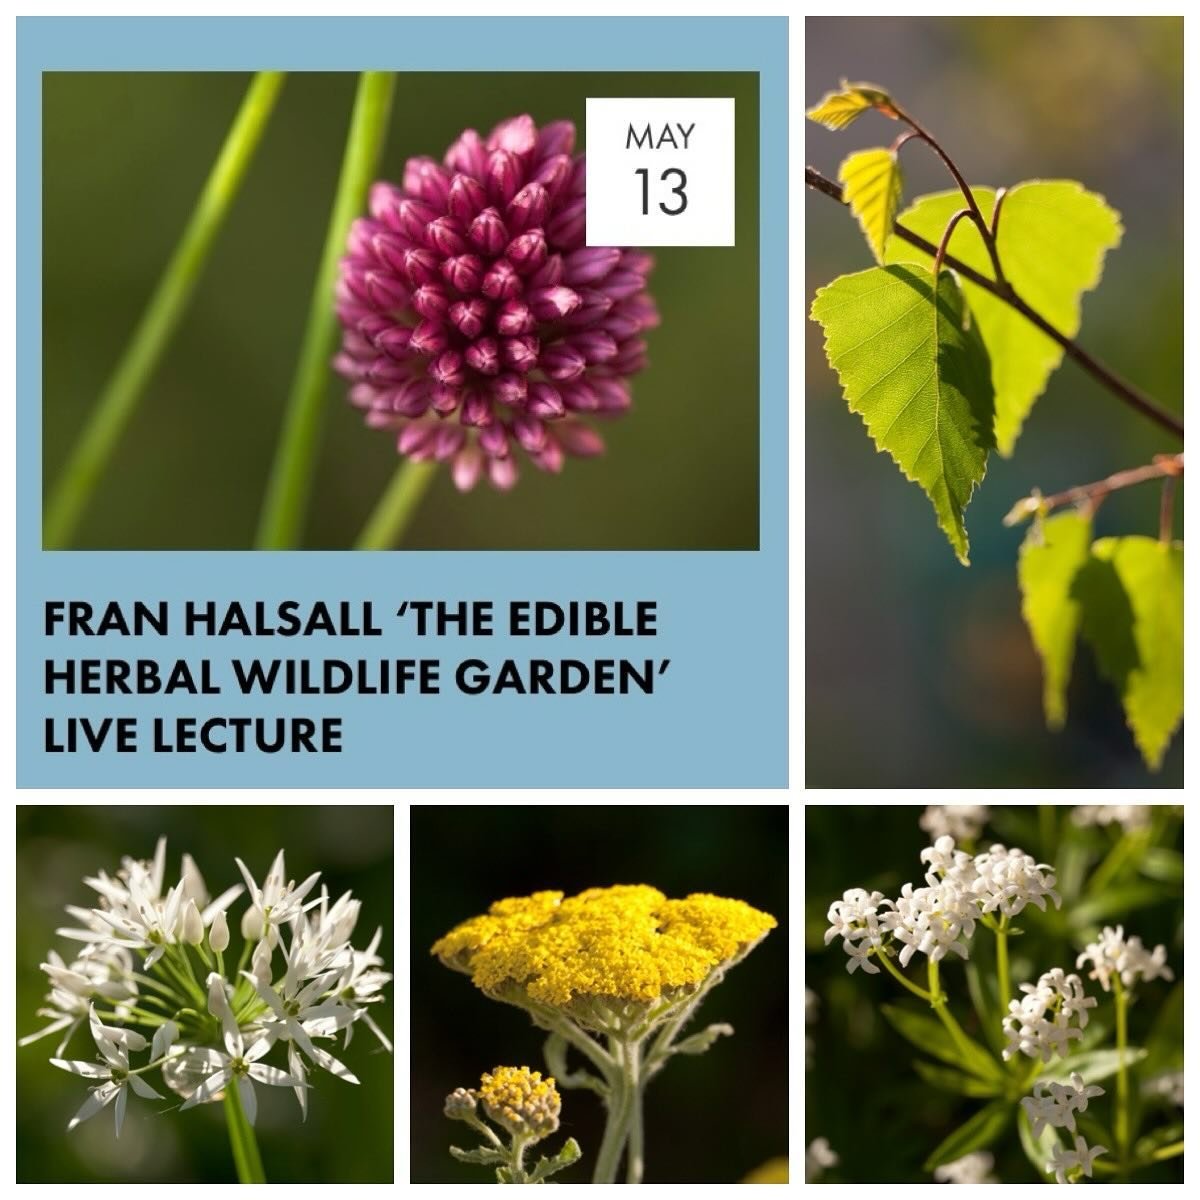 For our @fobsheffield talk on Monday 13 May we welcome Fran Halsall, landscape photographer, writer and currently Garden Services Manager at @regathercooperative advising on and designing private gardens and community greenspaces. 

Fran will talk ab